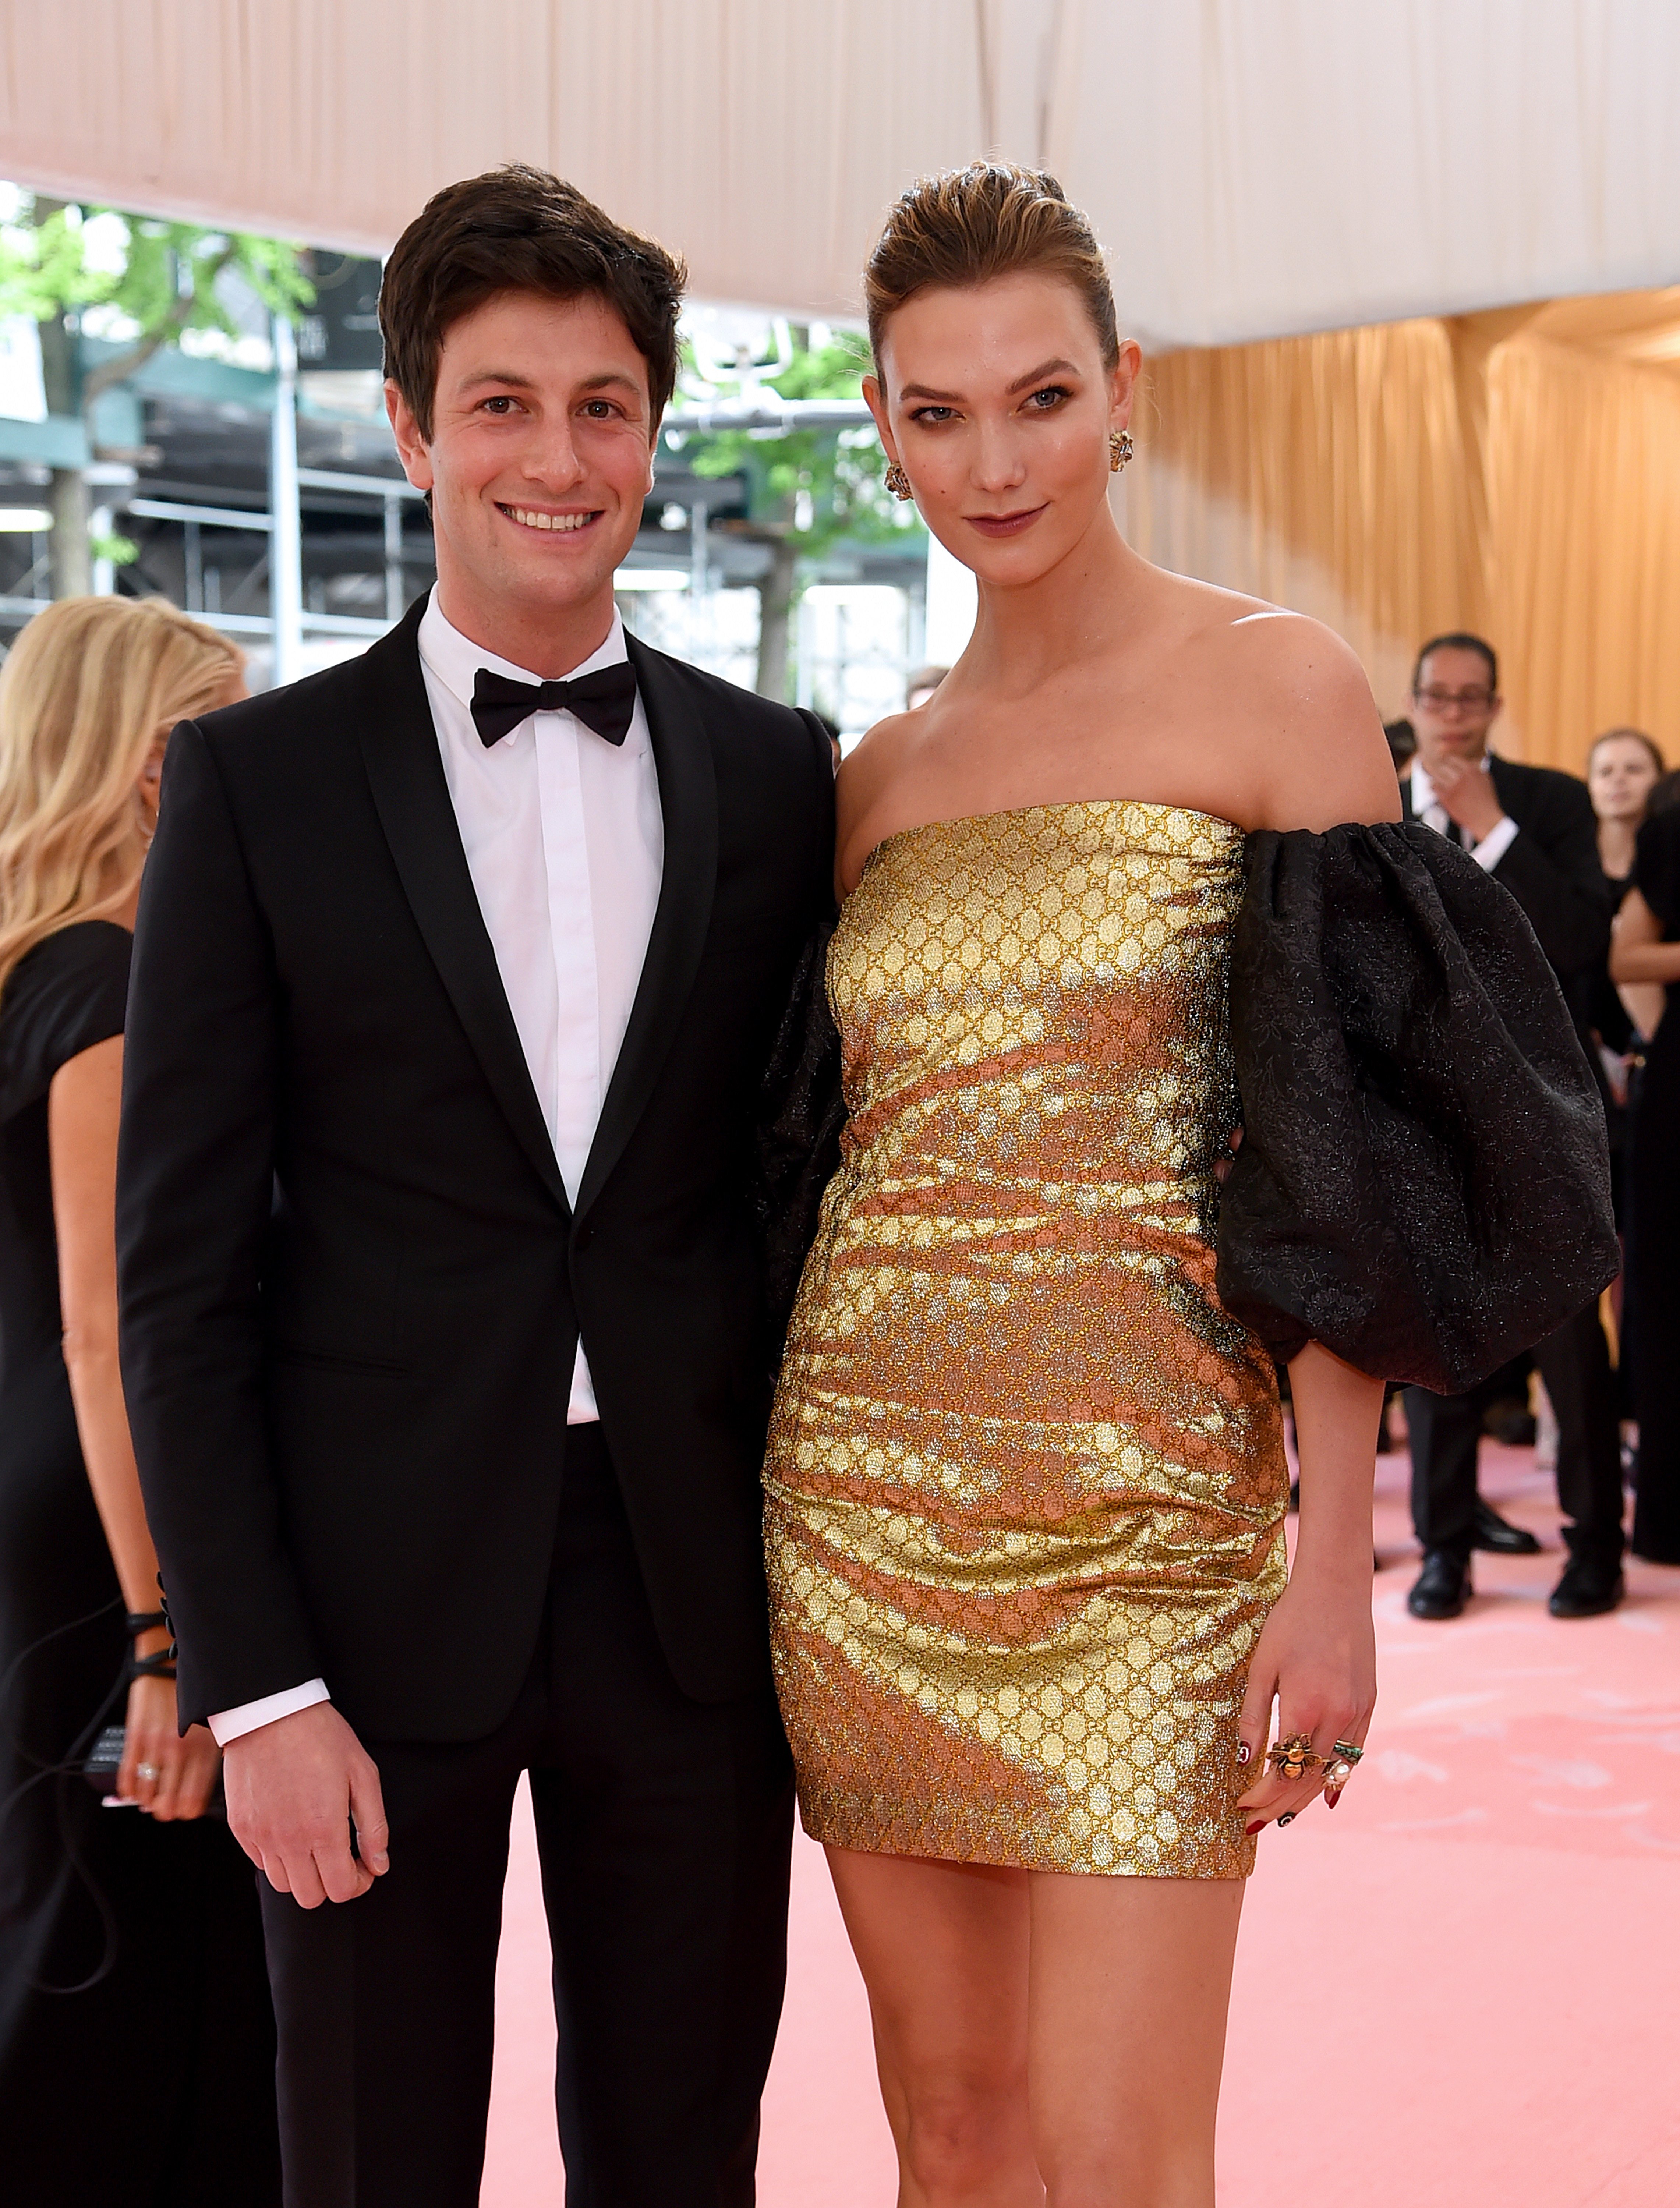 Joshua Kushner and Karlie Kloss attend The 2019 Met Gala Celebrating Camp: Notes on Fashion at Metropolitan Museum of Art on May 06, 2019, in New York City. | Source: Getty Images.